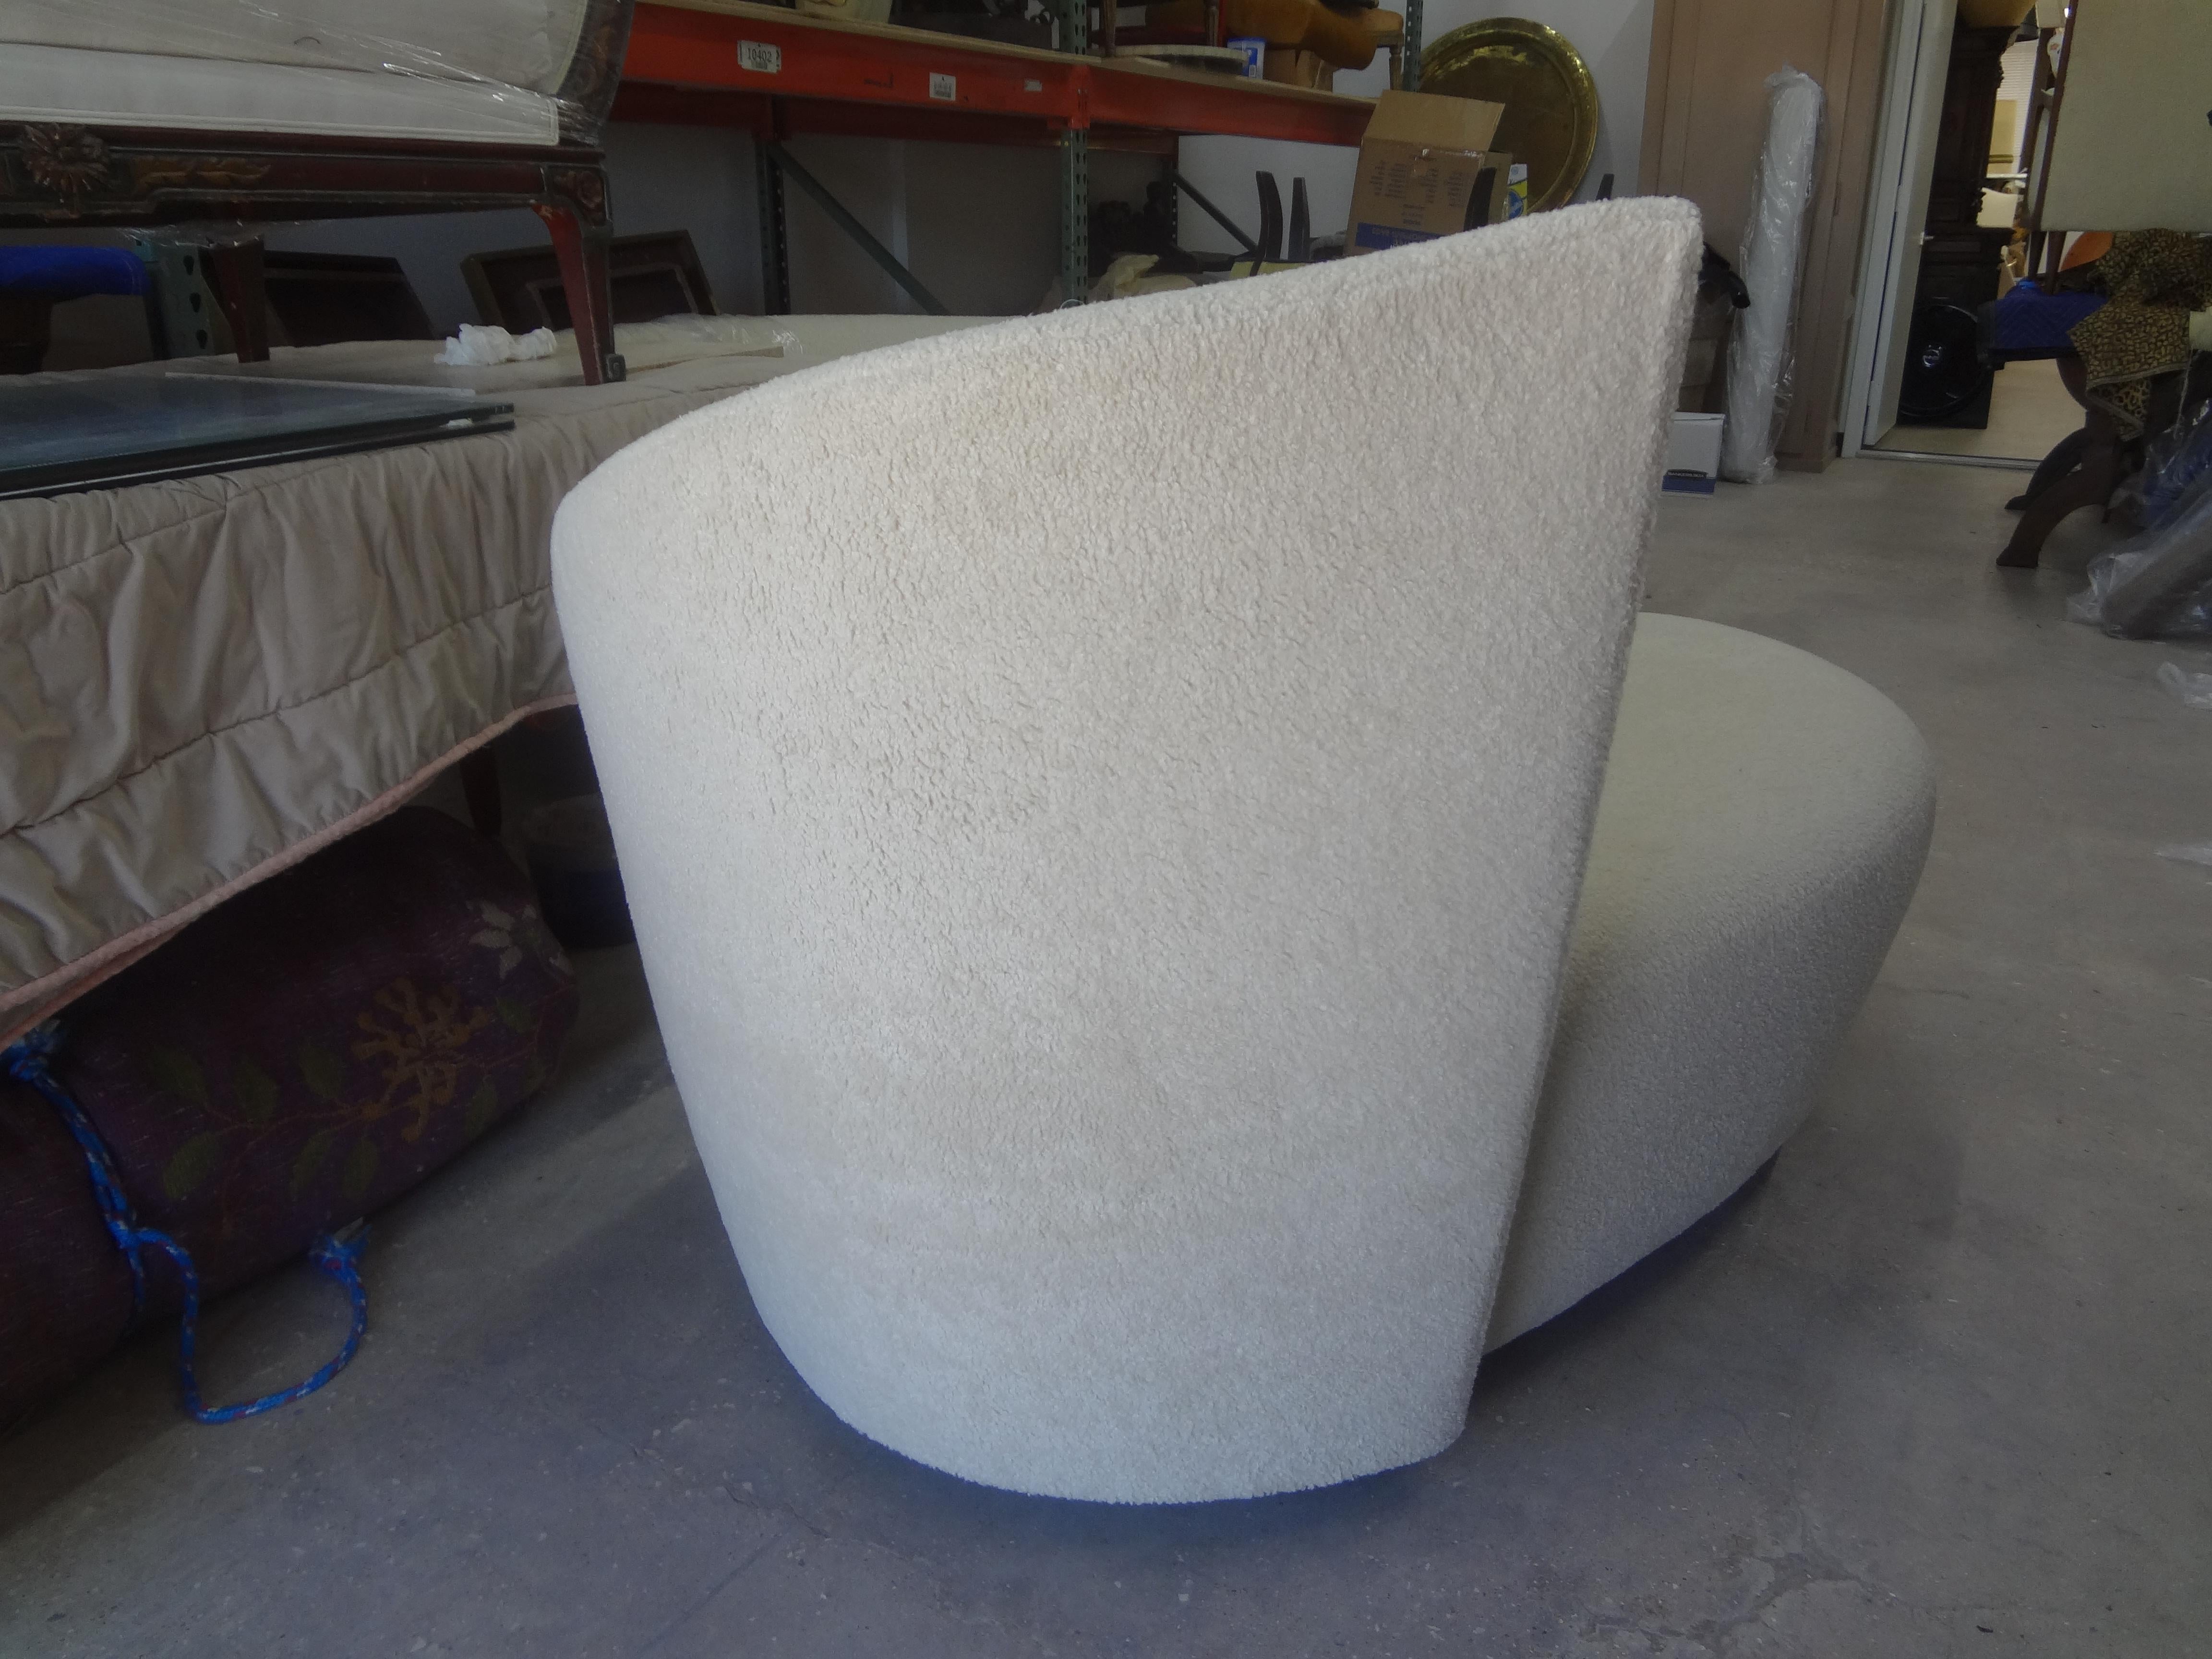 Postmodern Curvaceous Sculptural Chaise In Good Condition For Sale In Houston, TX